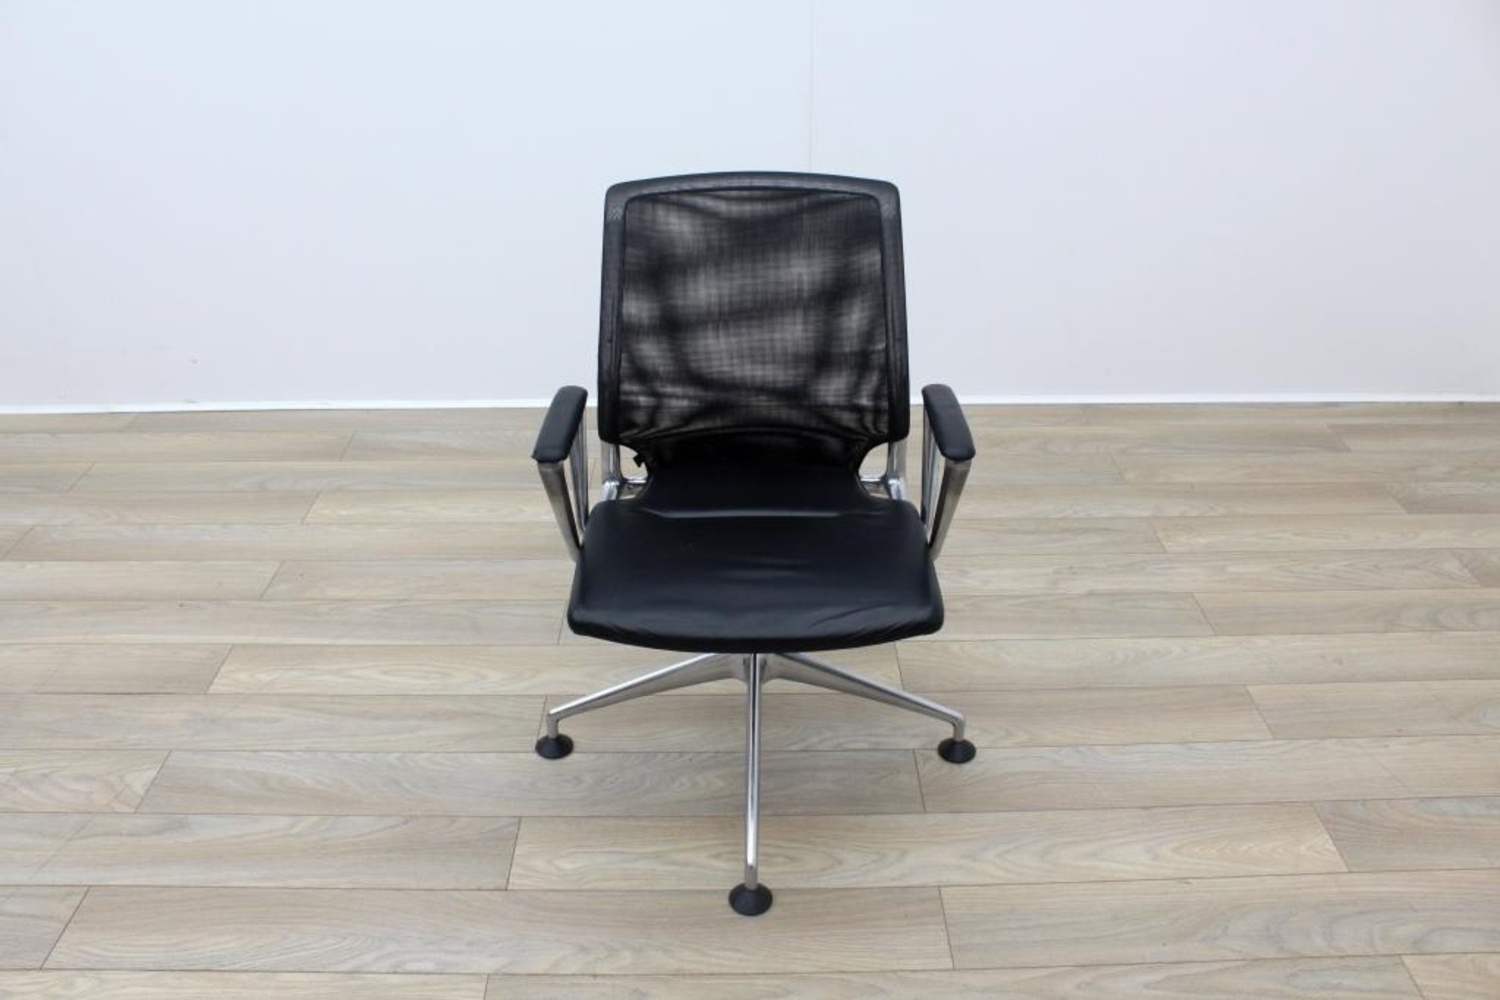 Black chair with a mesh